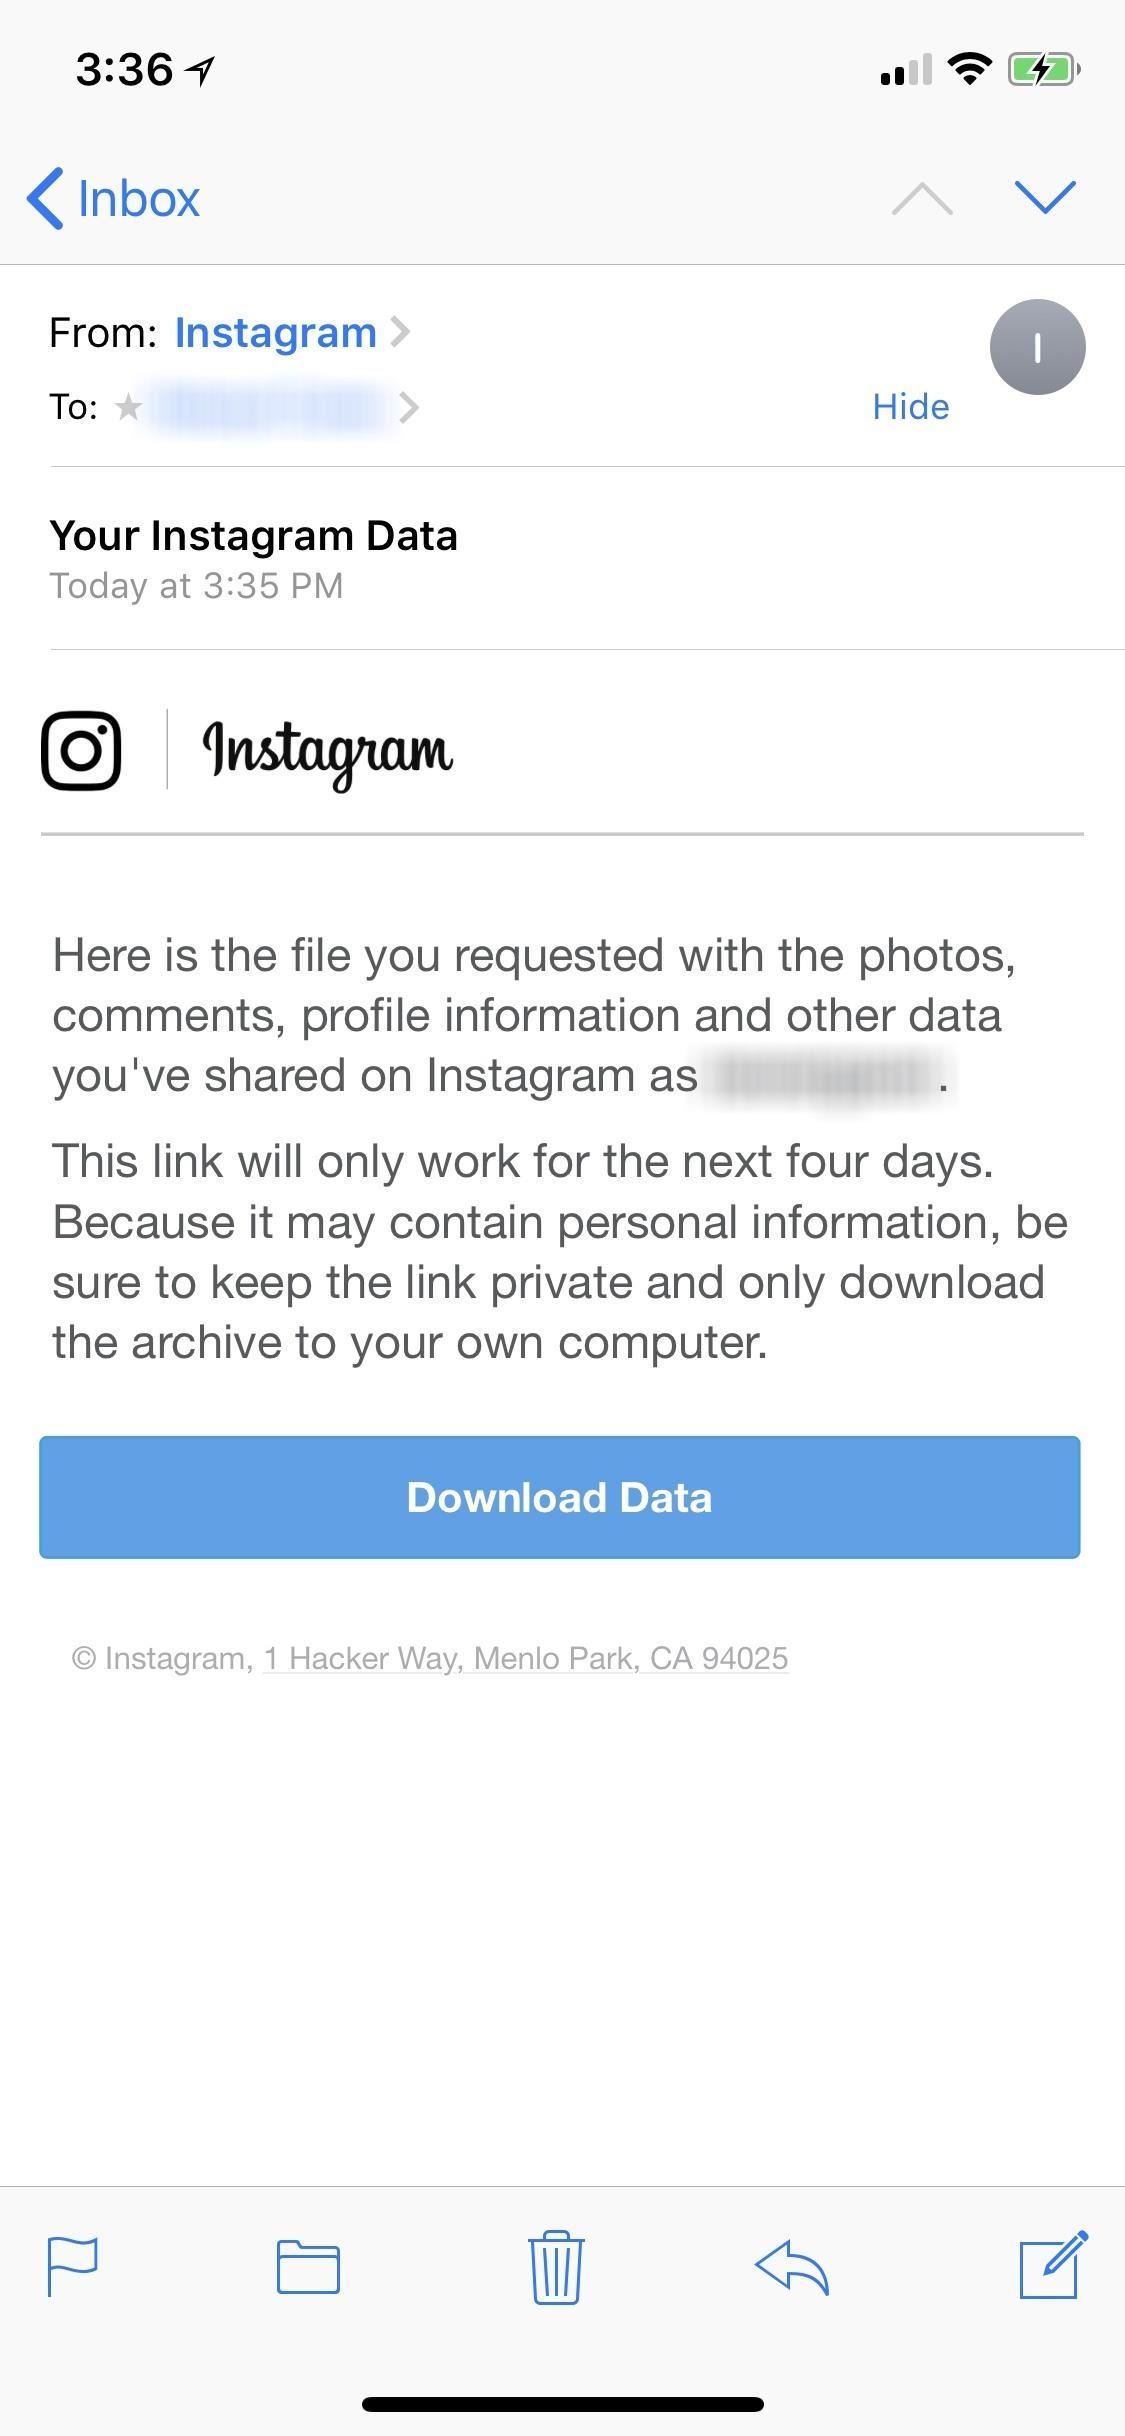 Instagram 101: How to Download a Backup of Your Account to Save Photos, Comments & More